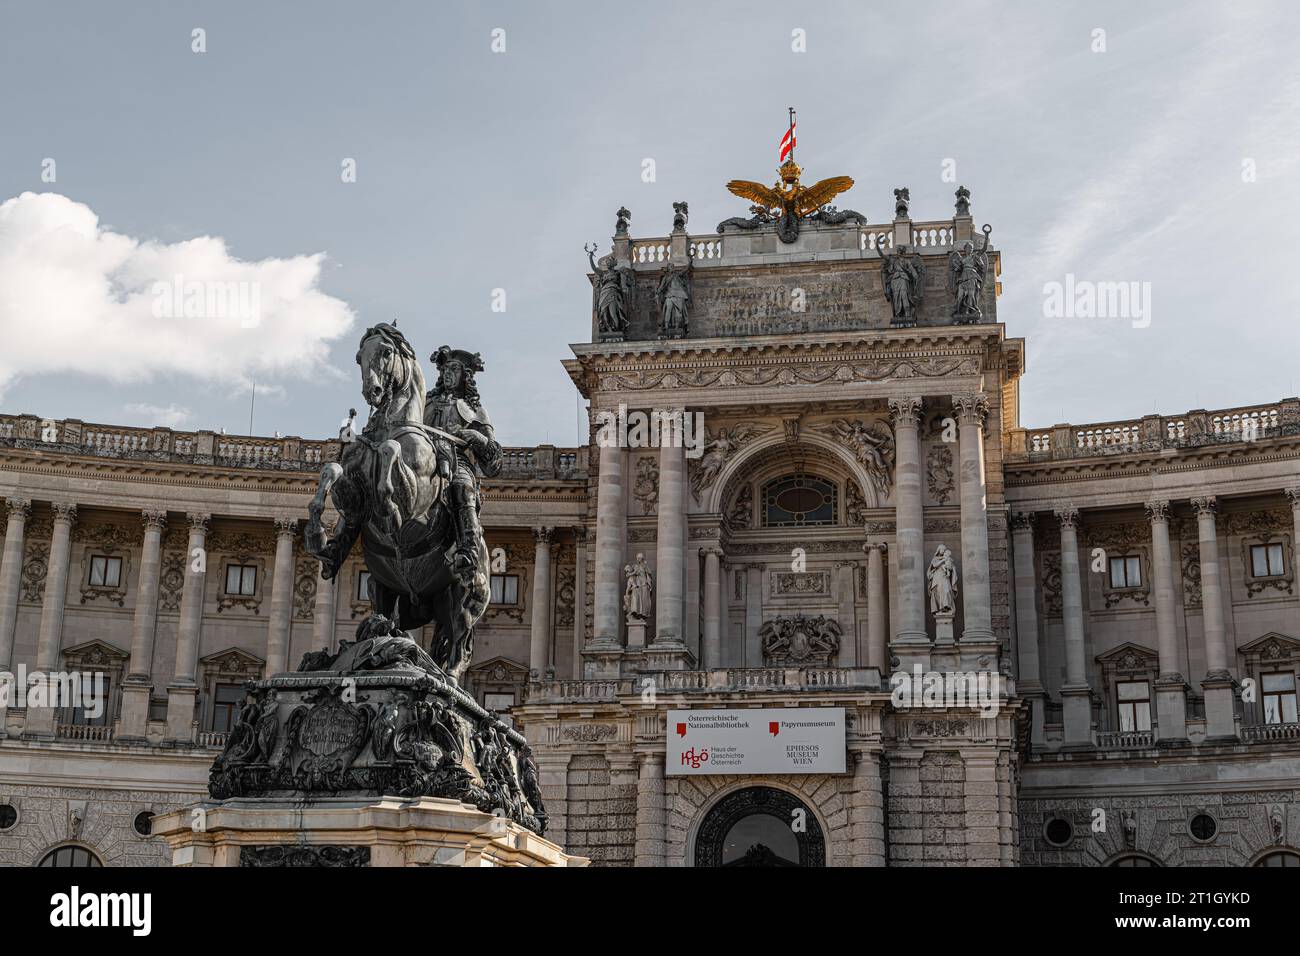 A view of Heldenplatz in Vienna, Austria against a cloudy blue sky Stock Photo